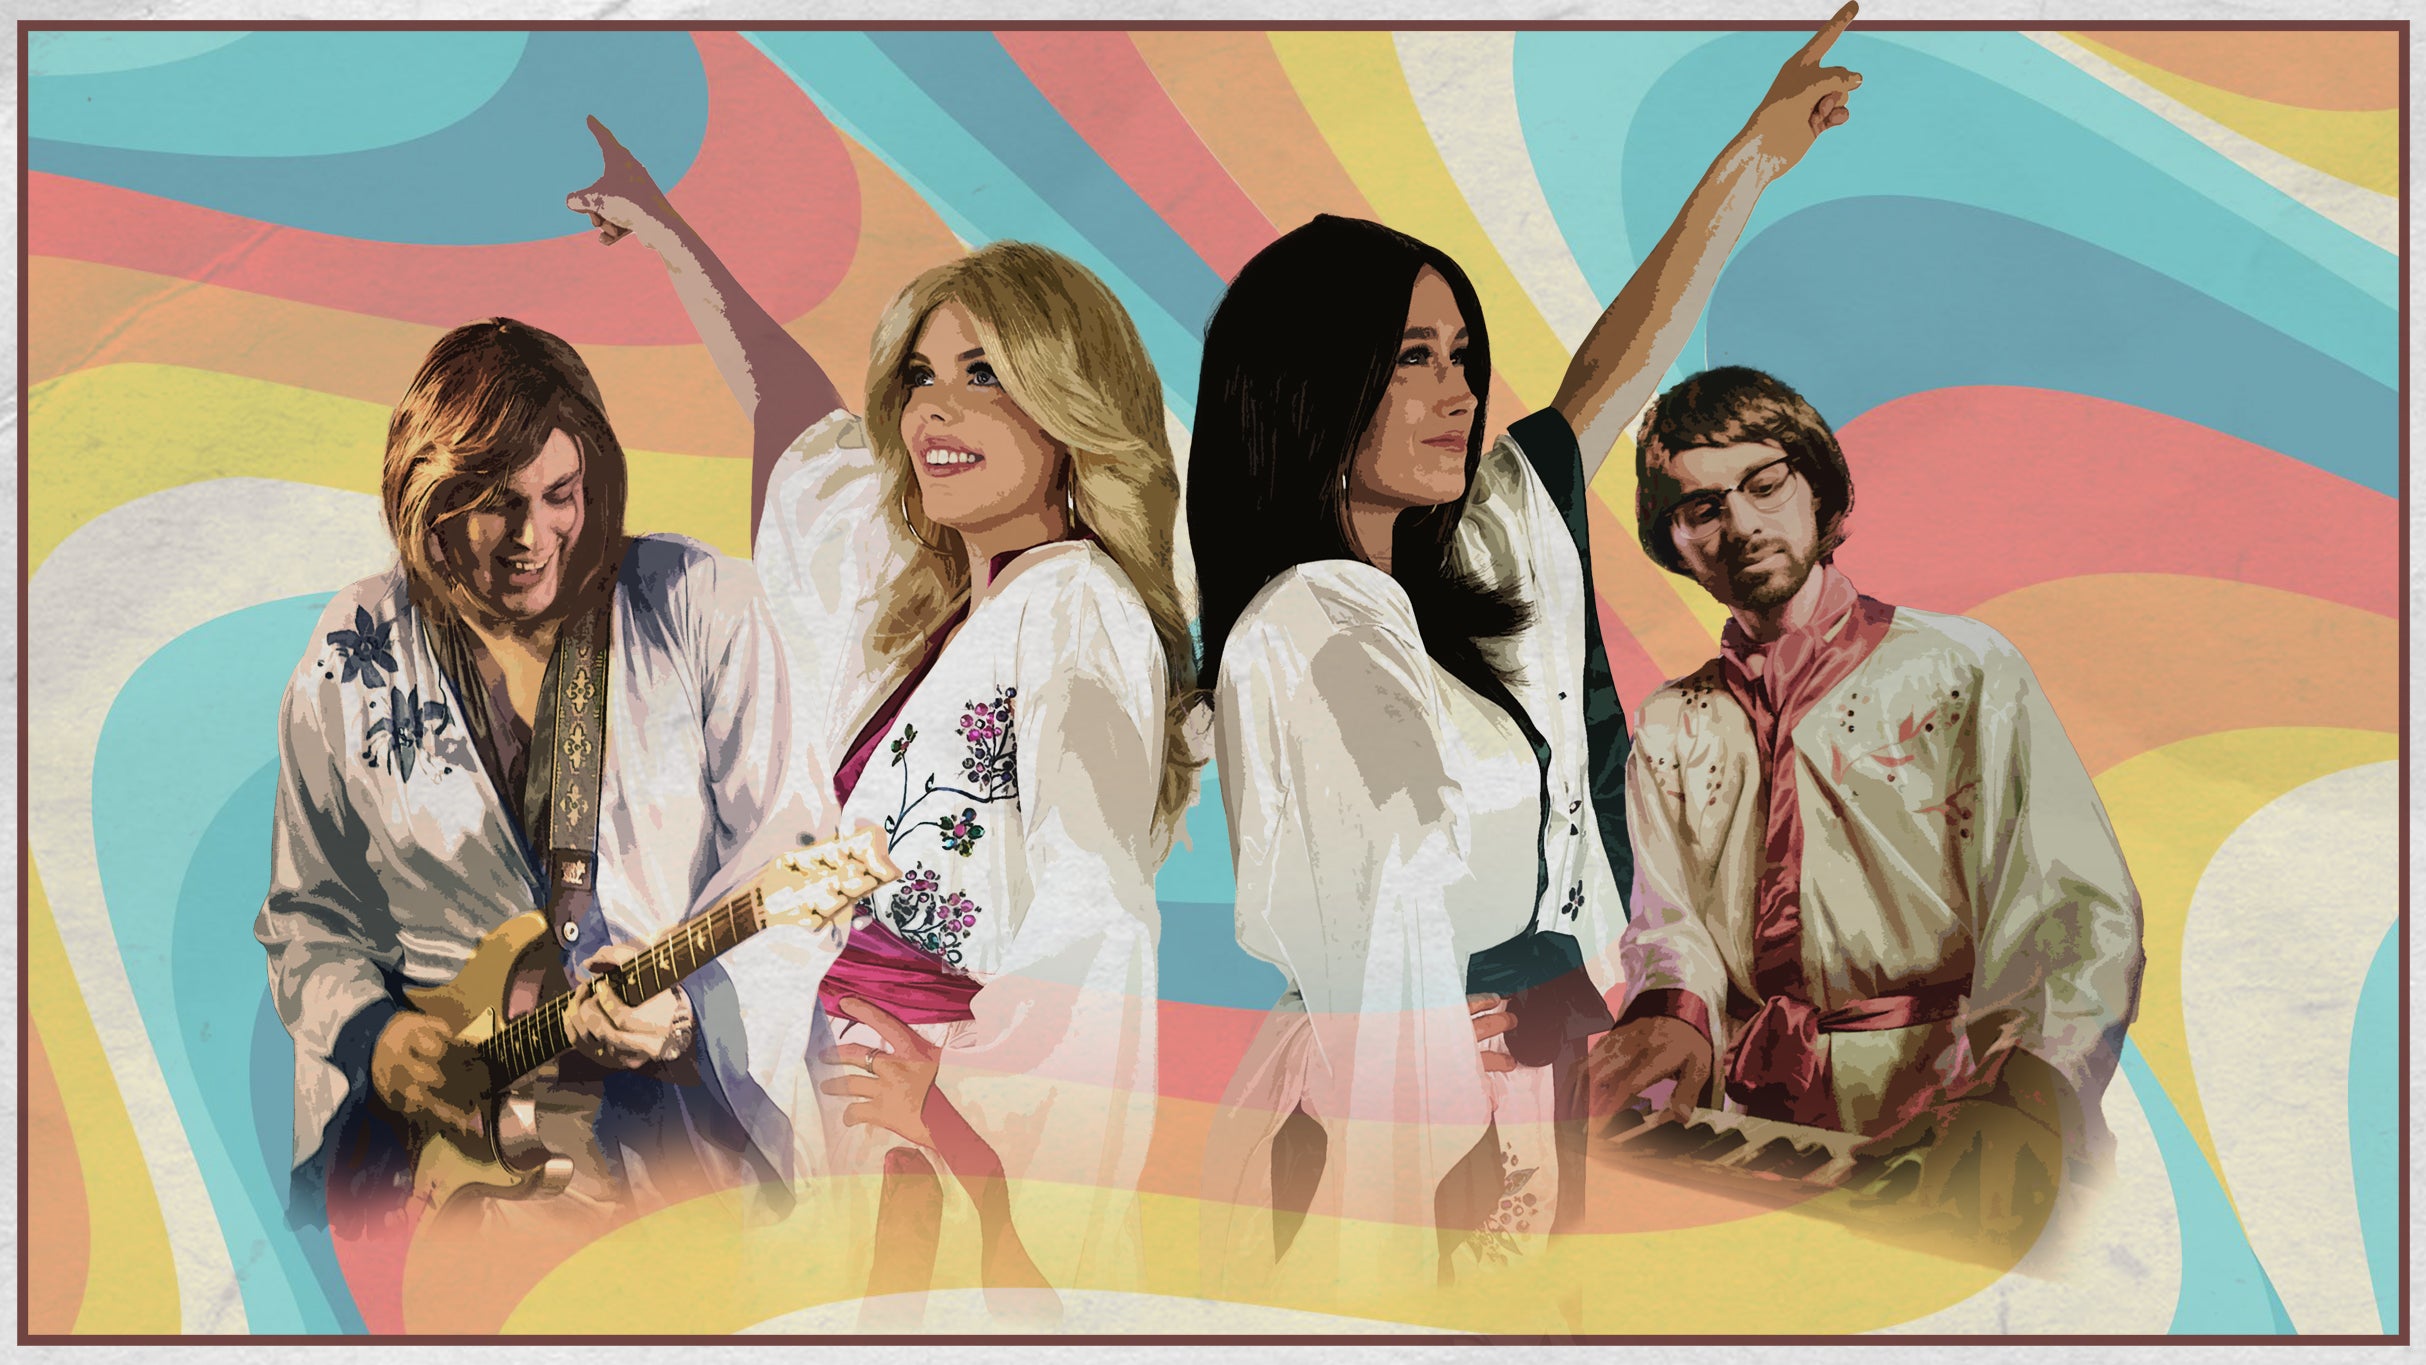 Image used with permission from Ticketmaster | Gold - The Ultimate ABBA Show tickets